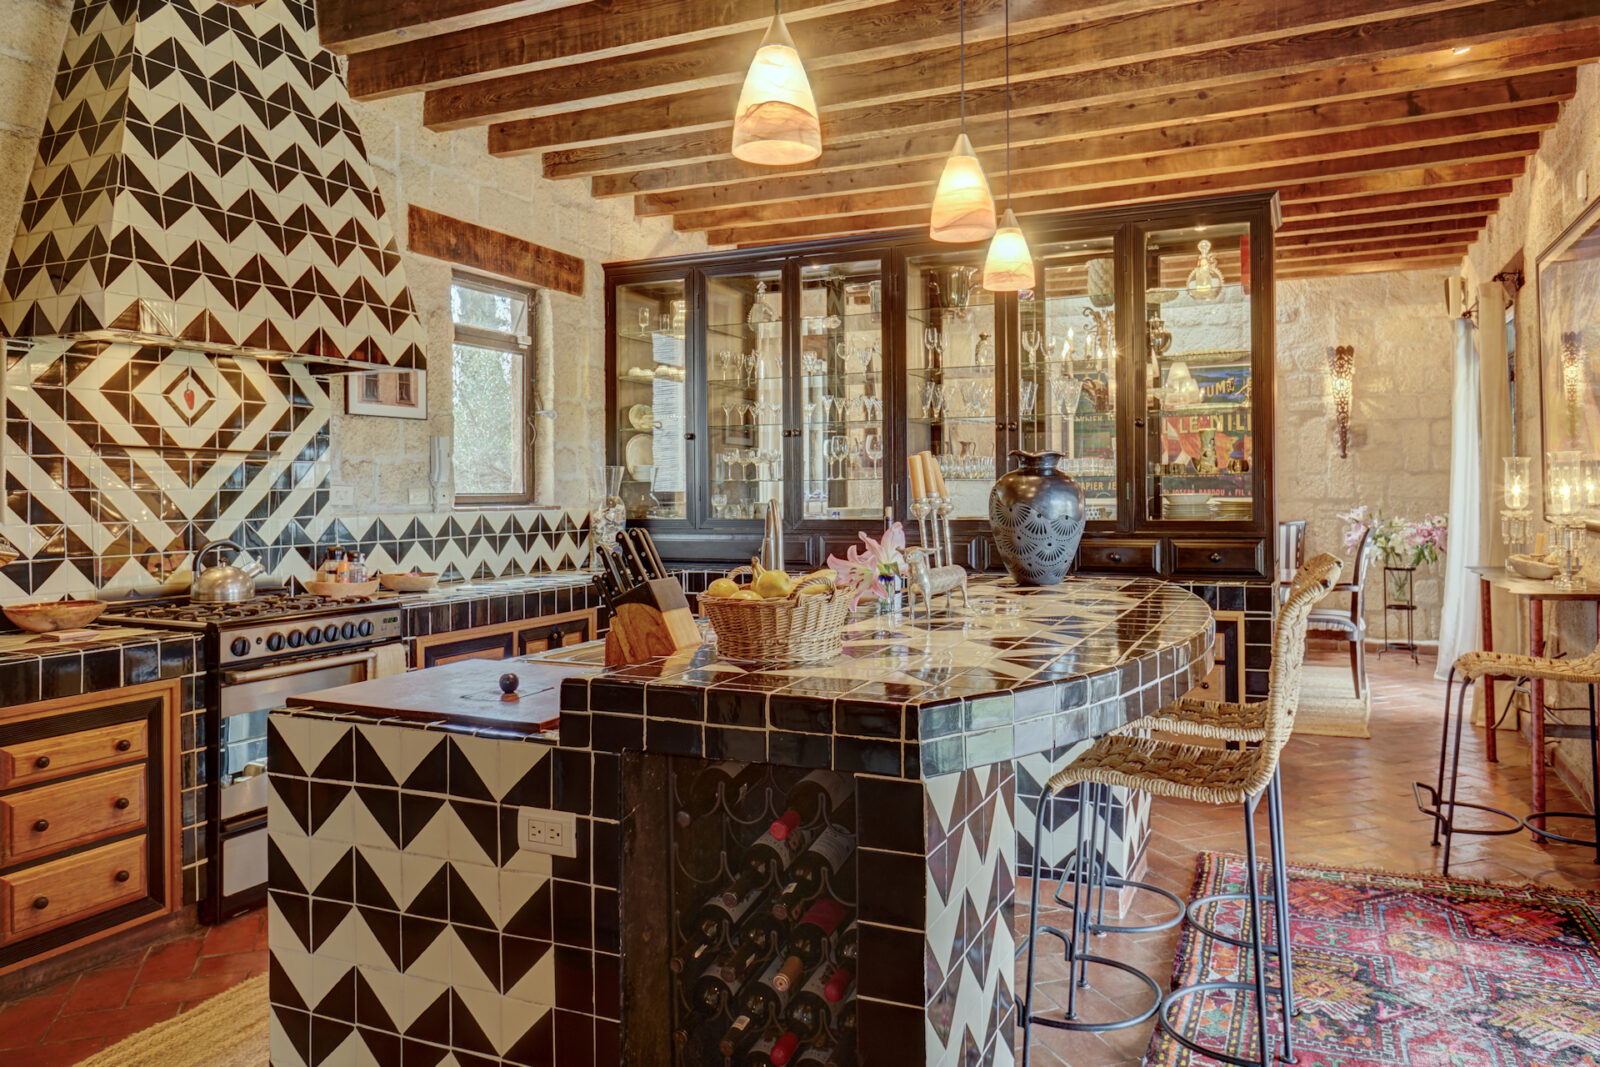 Elaborate tiling and wood beams in San Miguel home kitchen.